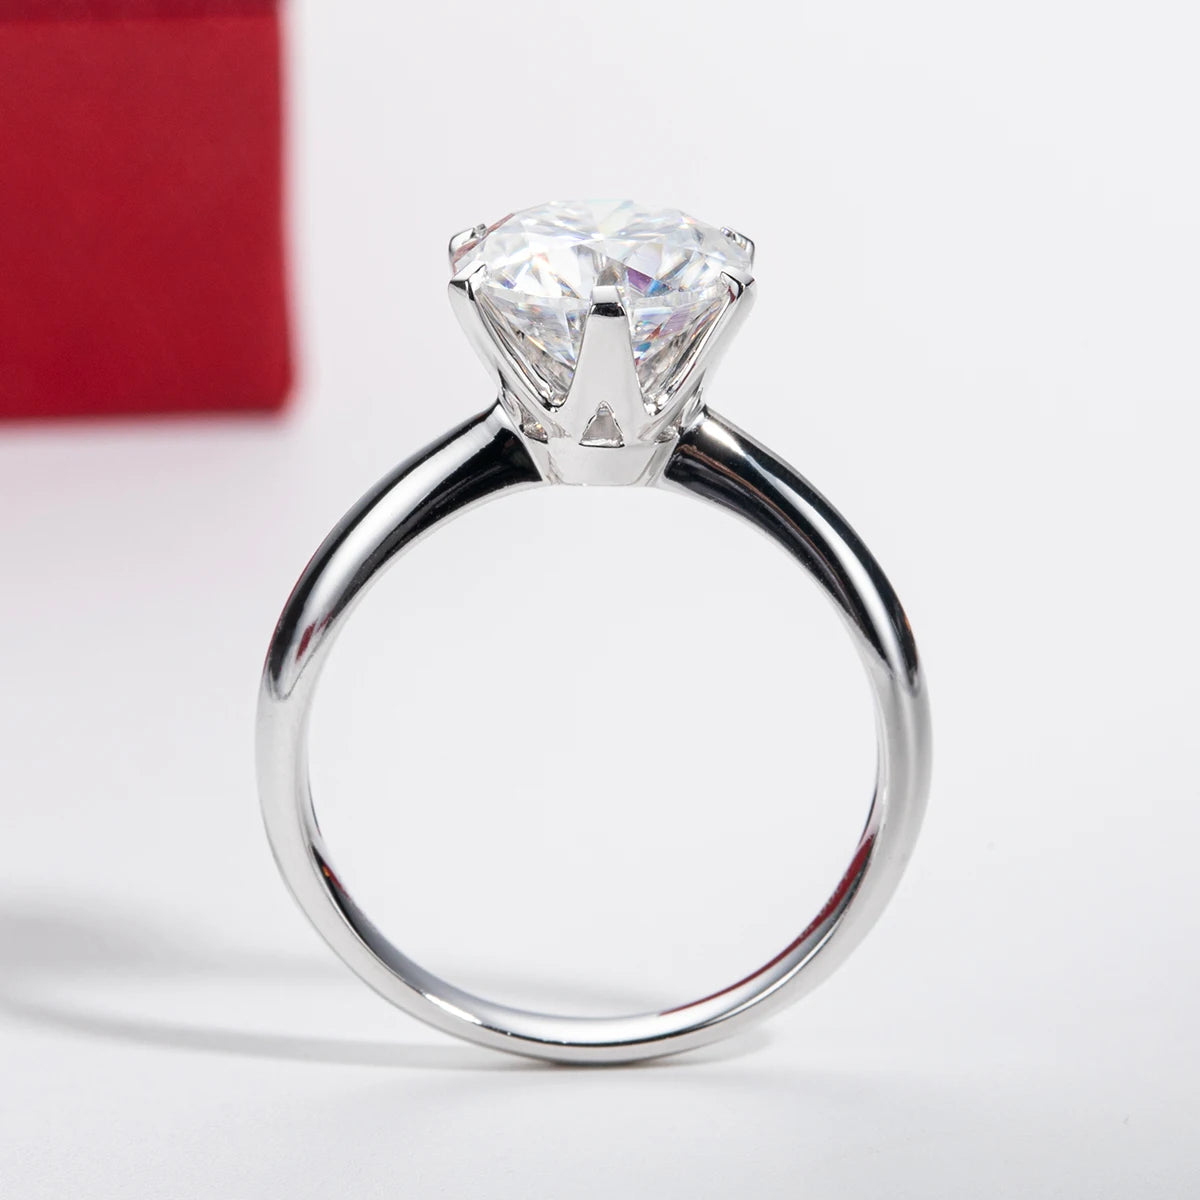 Moissanite White Gold Rings: Affordable & Durable Luxury Jewelry